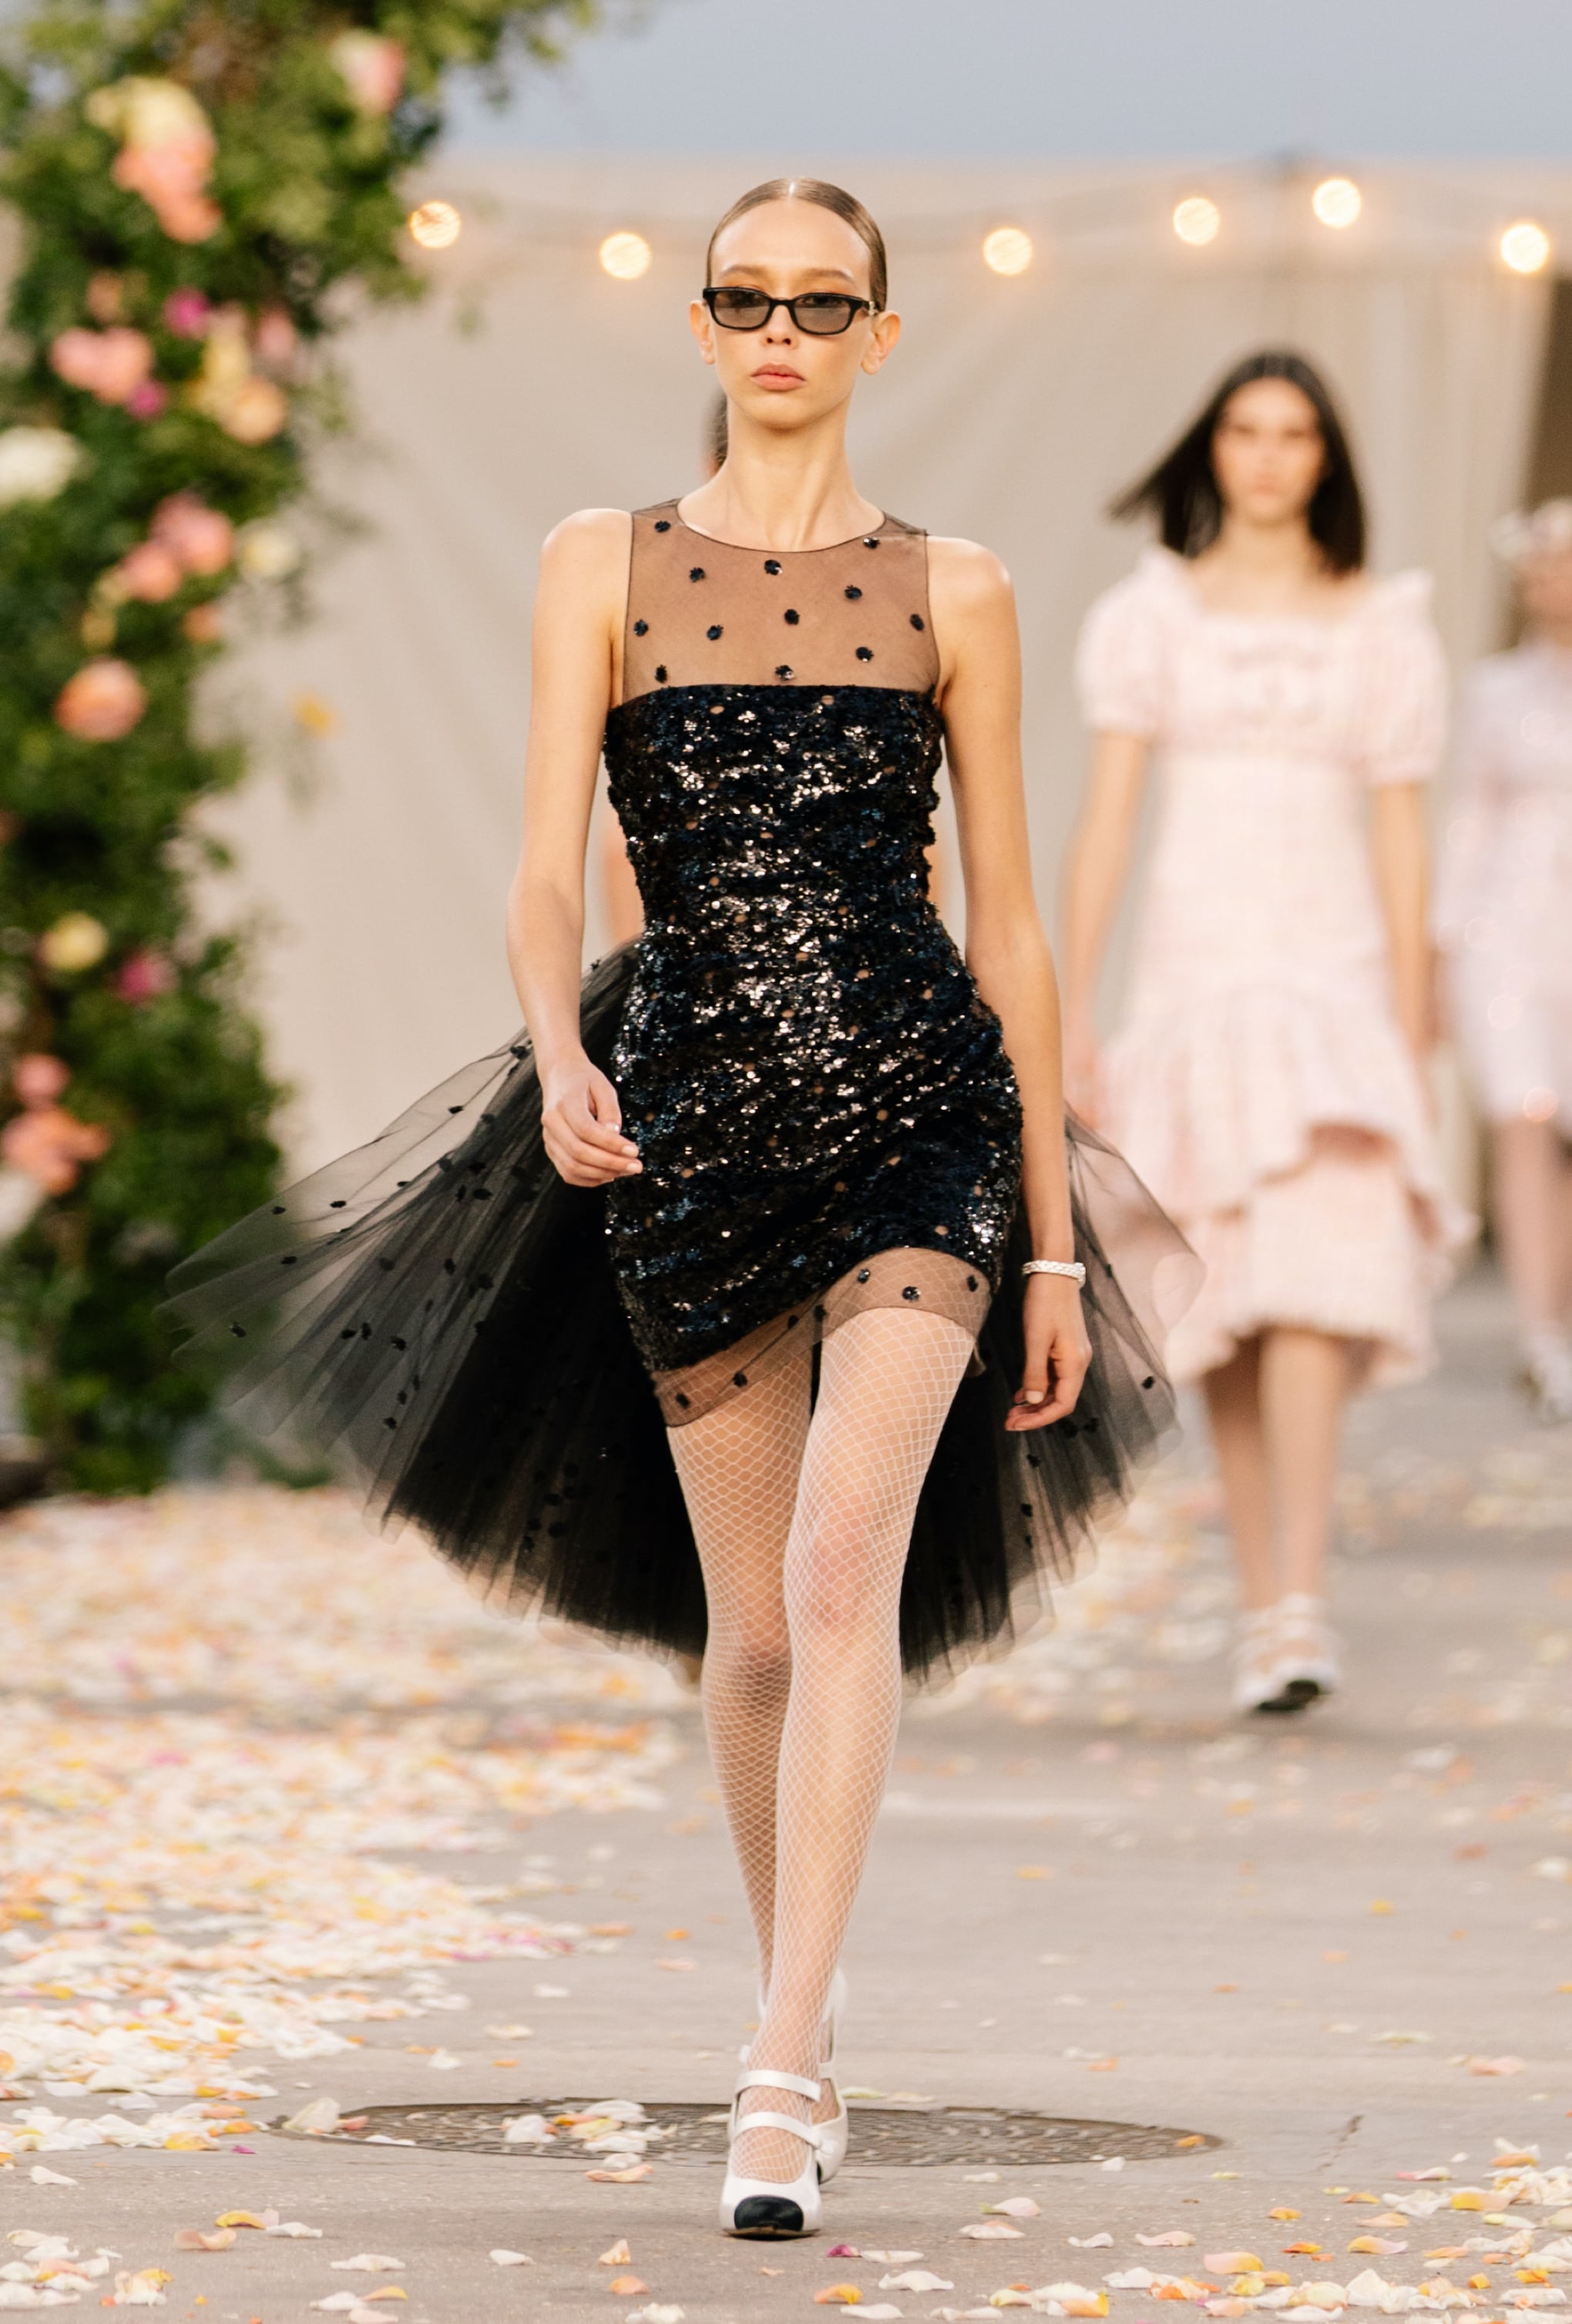 Tutu skirt takes centre stage in Paris as Chanel channels ballet trend, Chanel